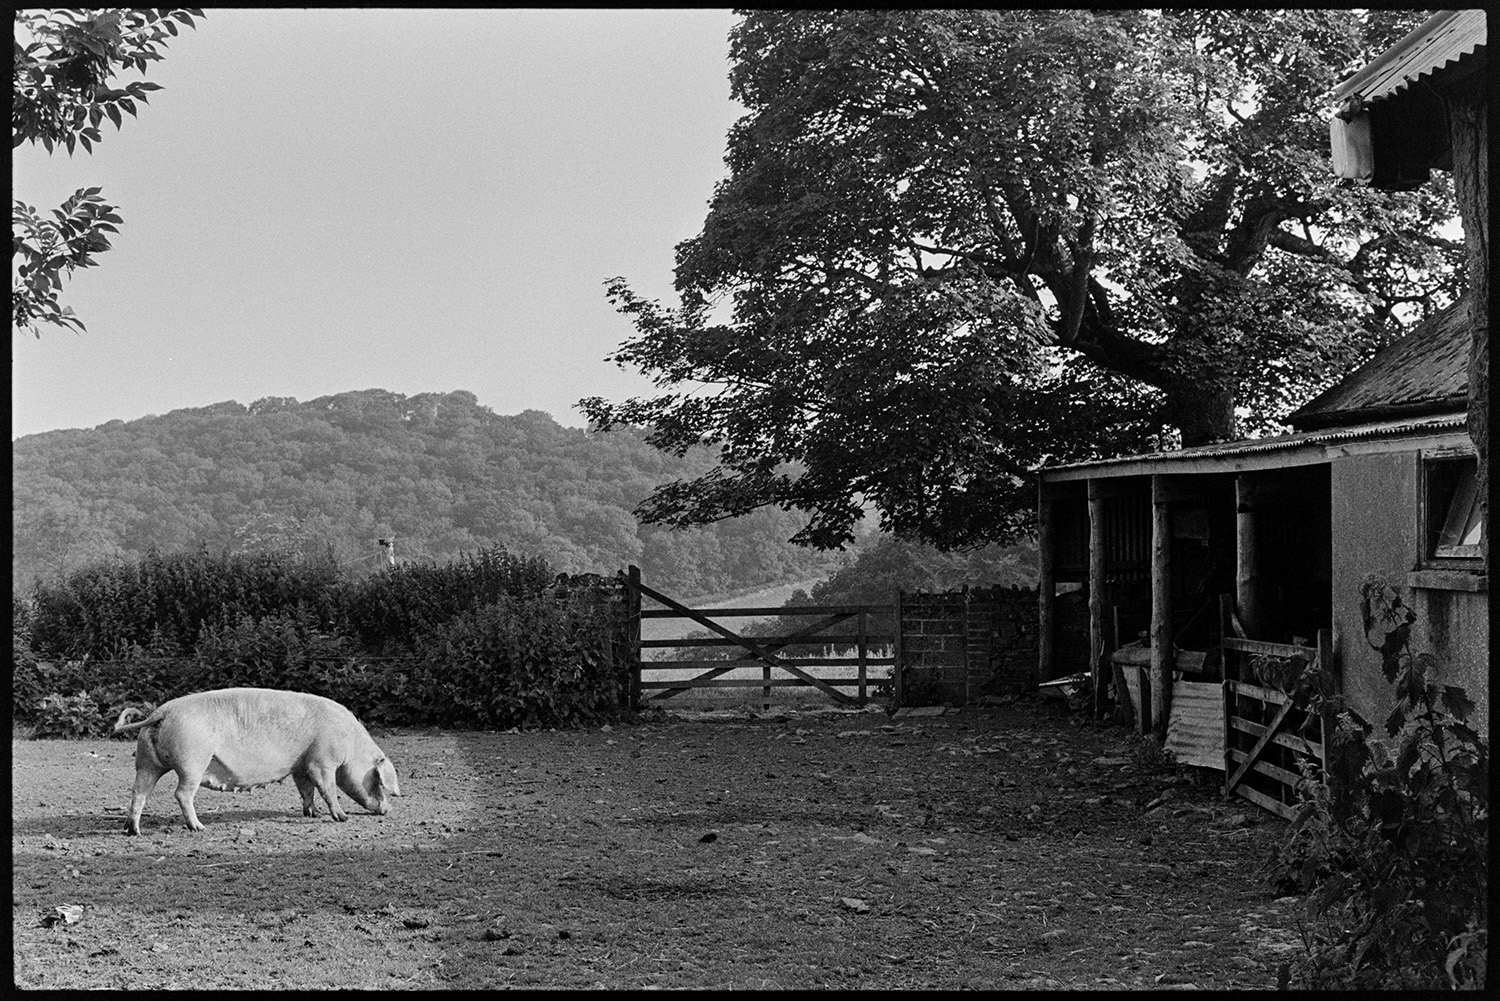 Pig in yard. 
[A pig in the farmyard at Farms for City Children, Nethercott, Iddesleigh. A barn and field gate are also visible and woodland can be seen in the background.]